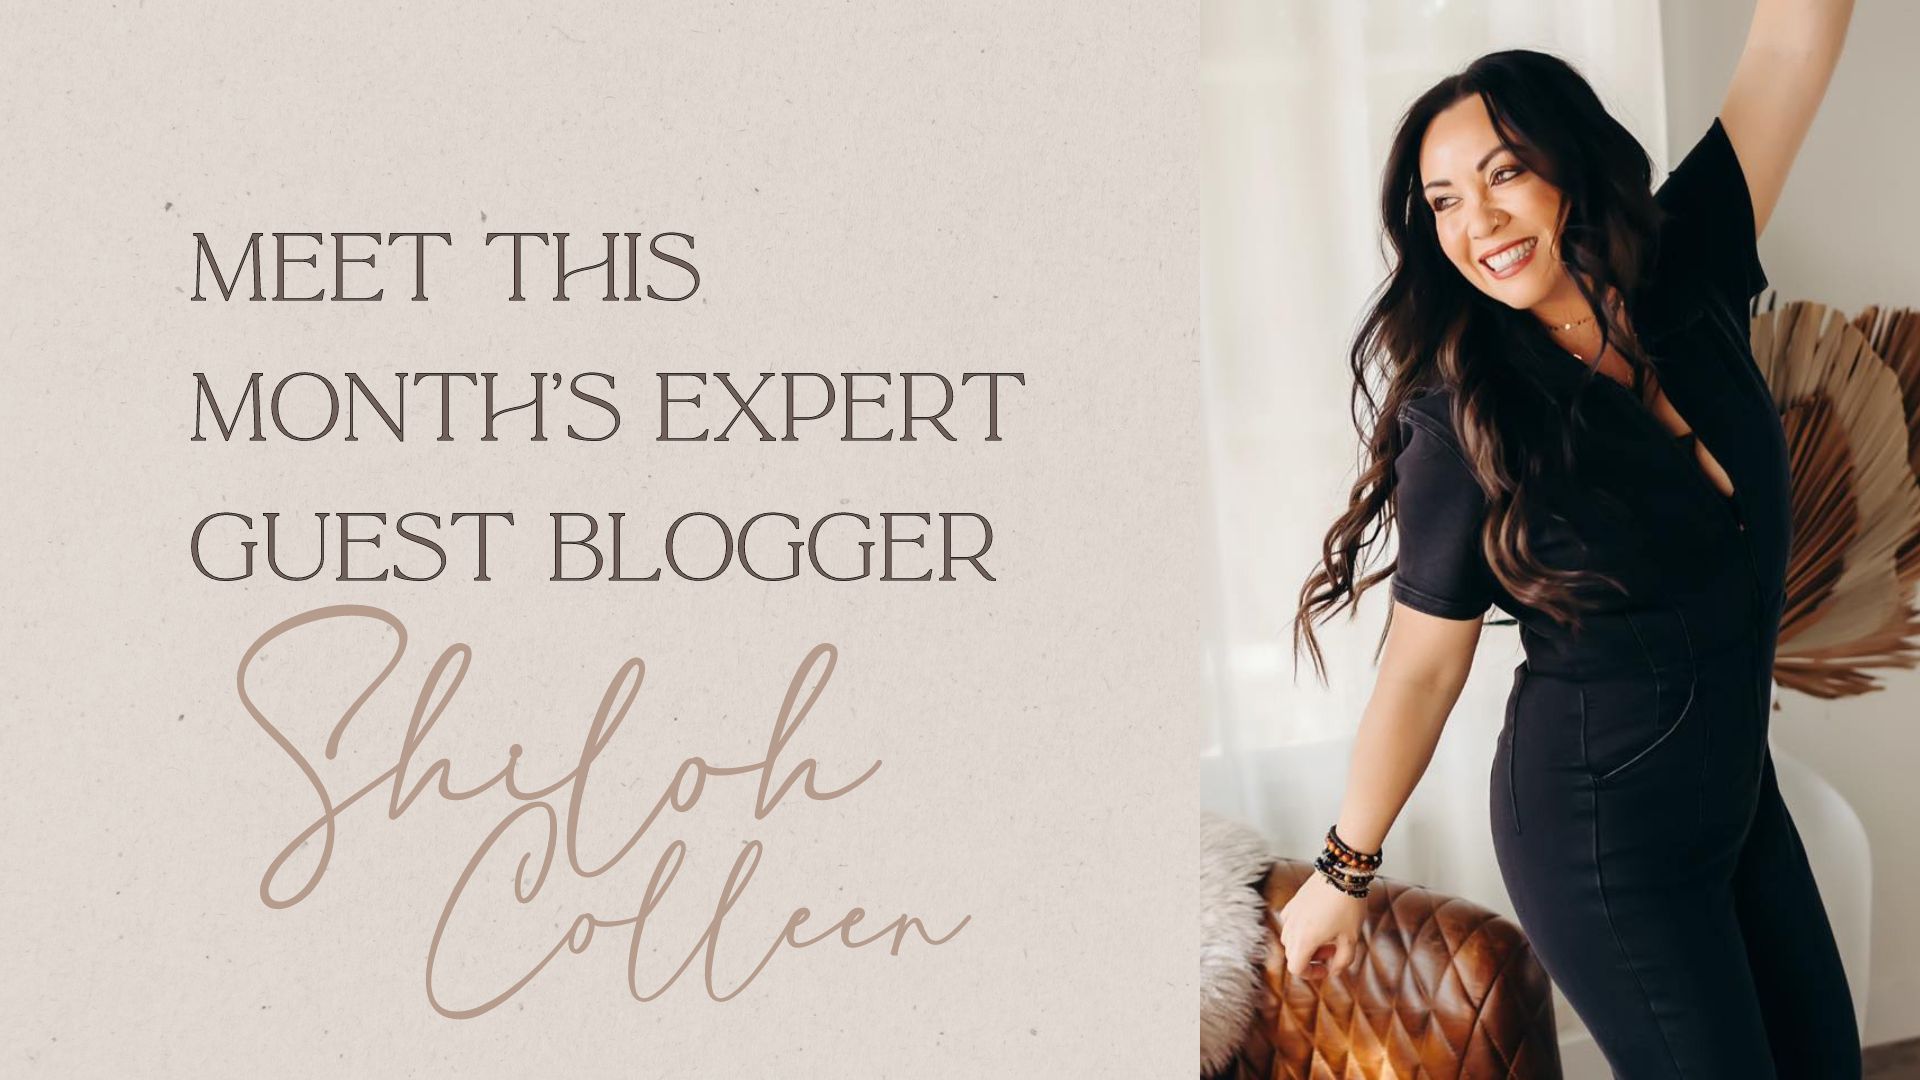 Expert Guest Blogger, photographer and educator Shiloh Colleen Reed